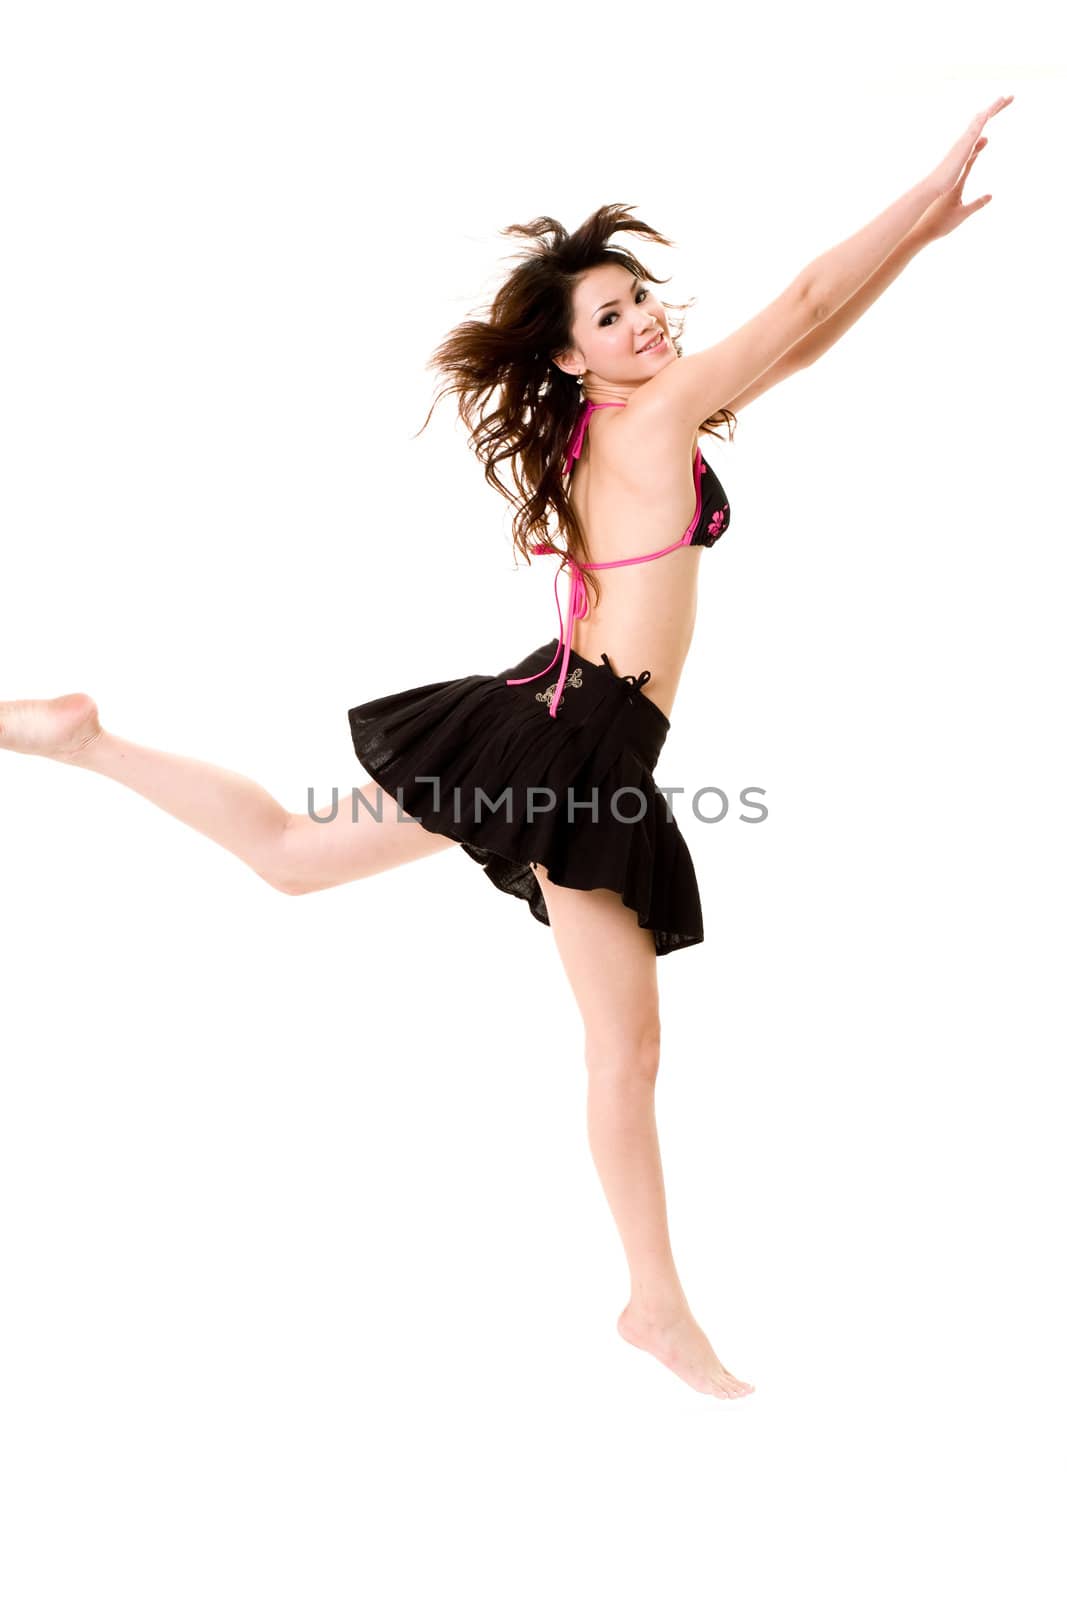 young woman in bkini top & skirt jumping freely and happily